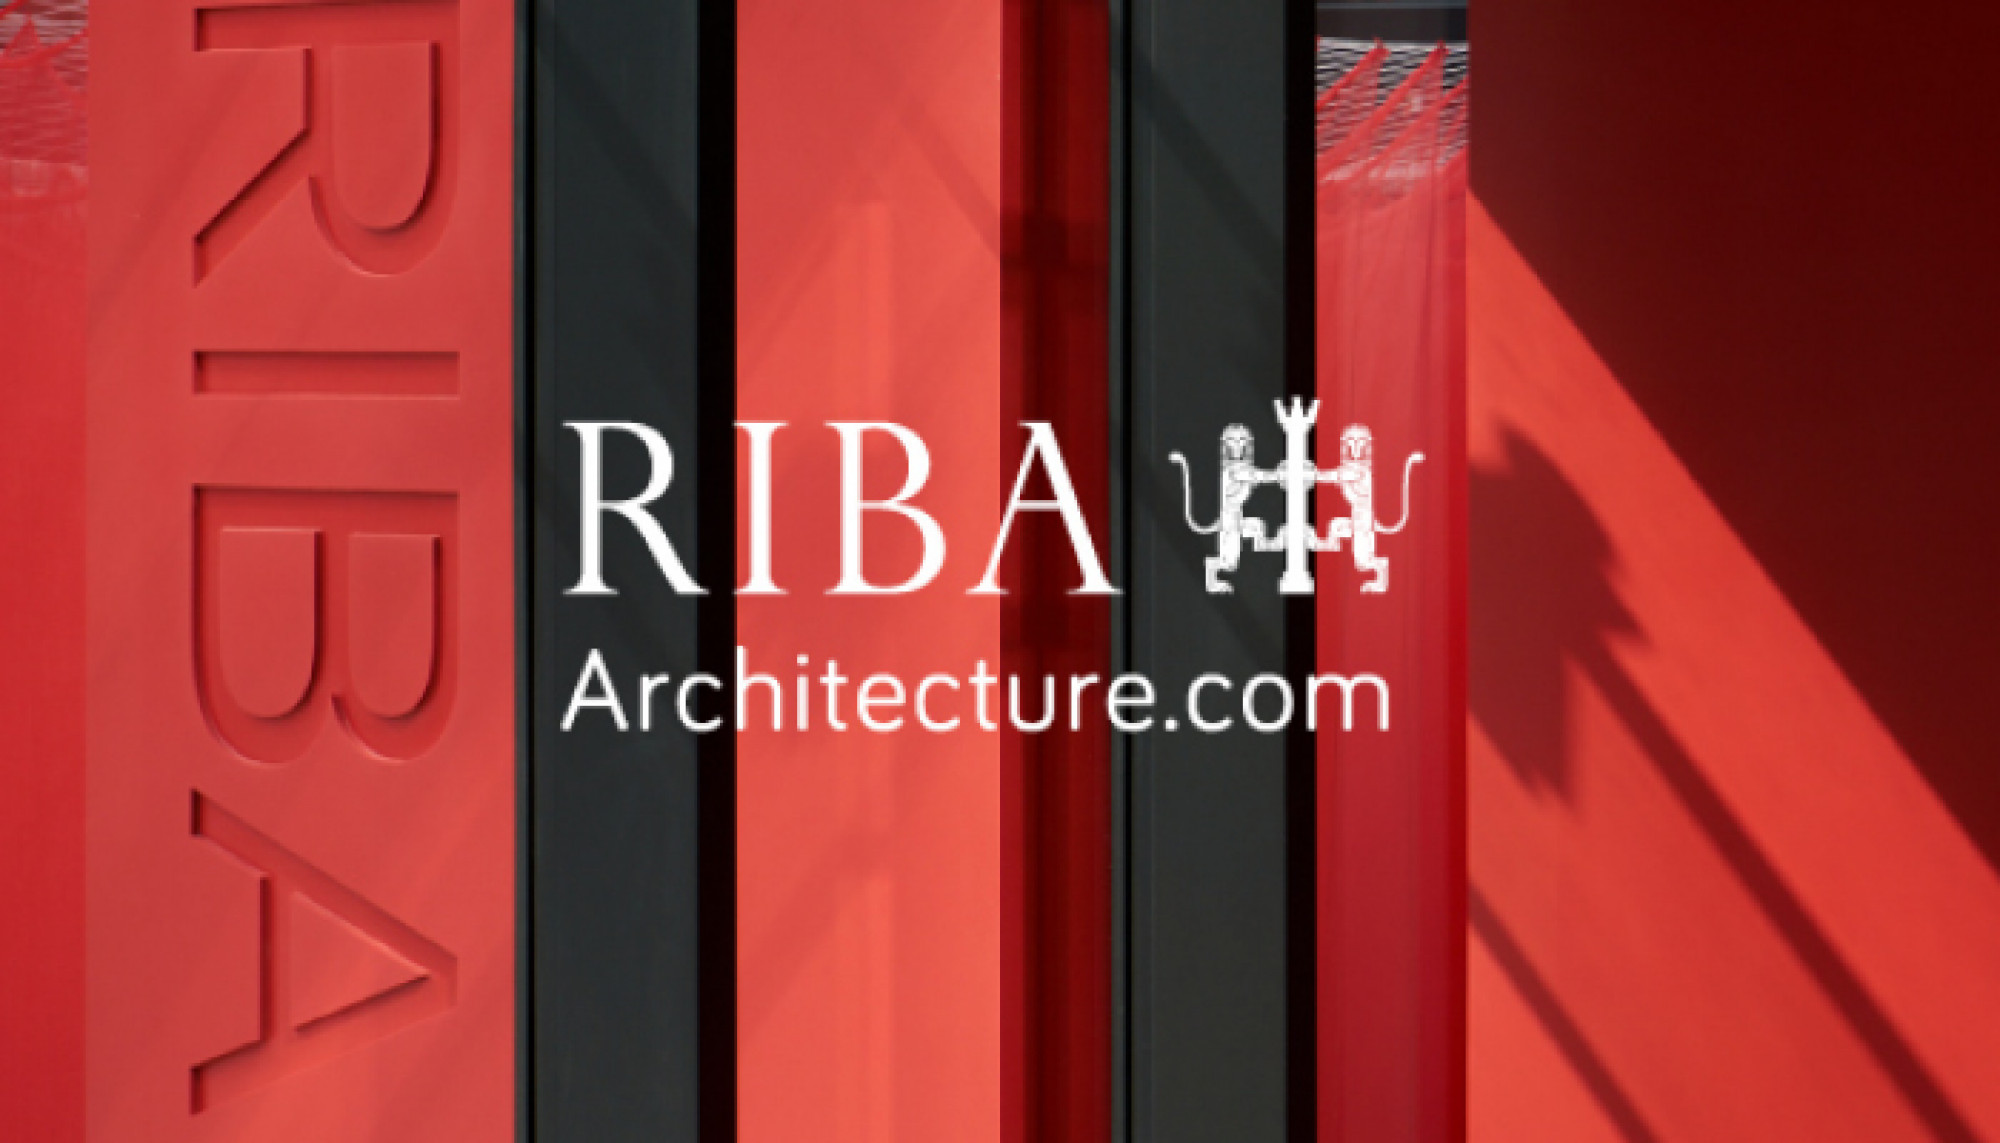 Dion Barrett interviewed by RIBA Architecture